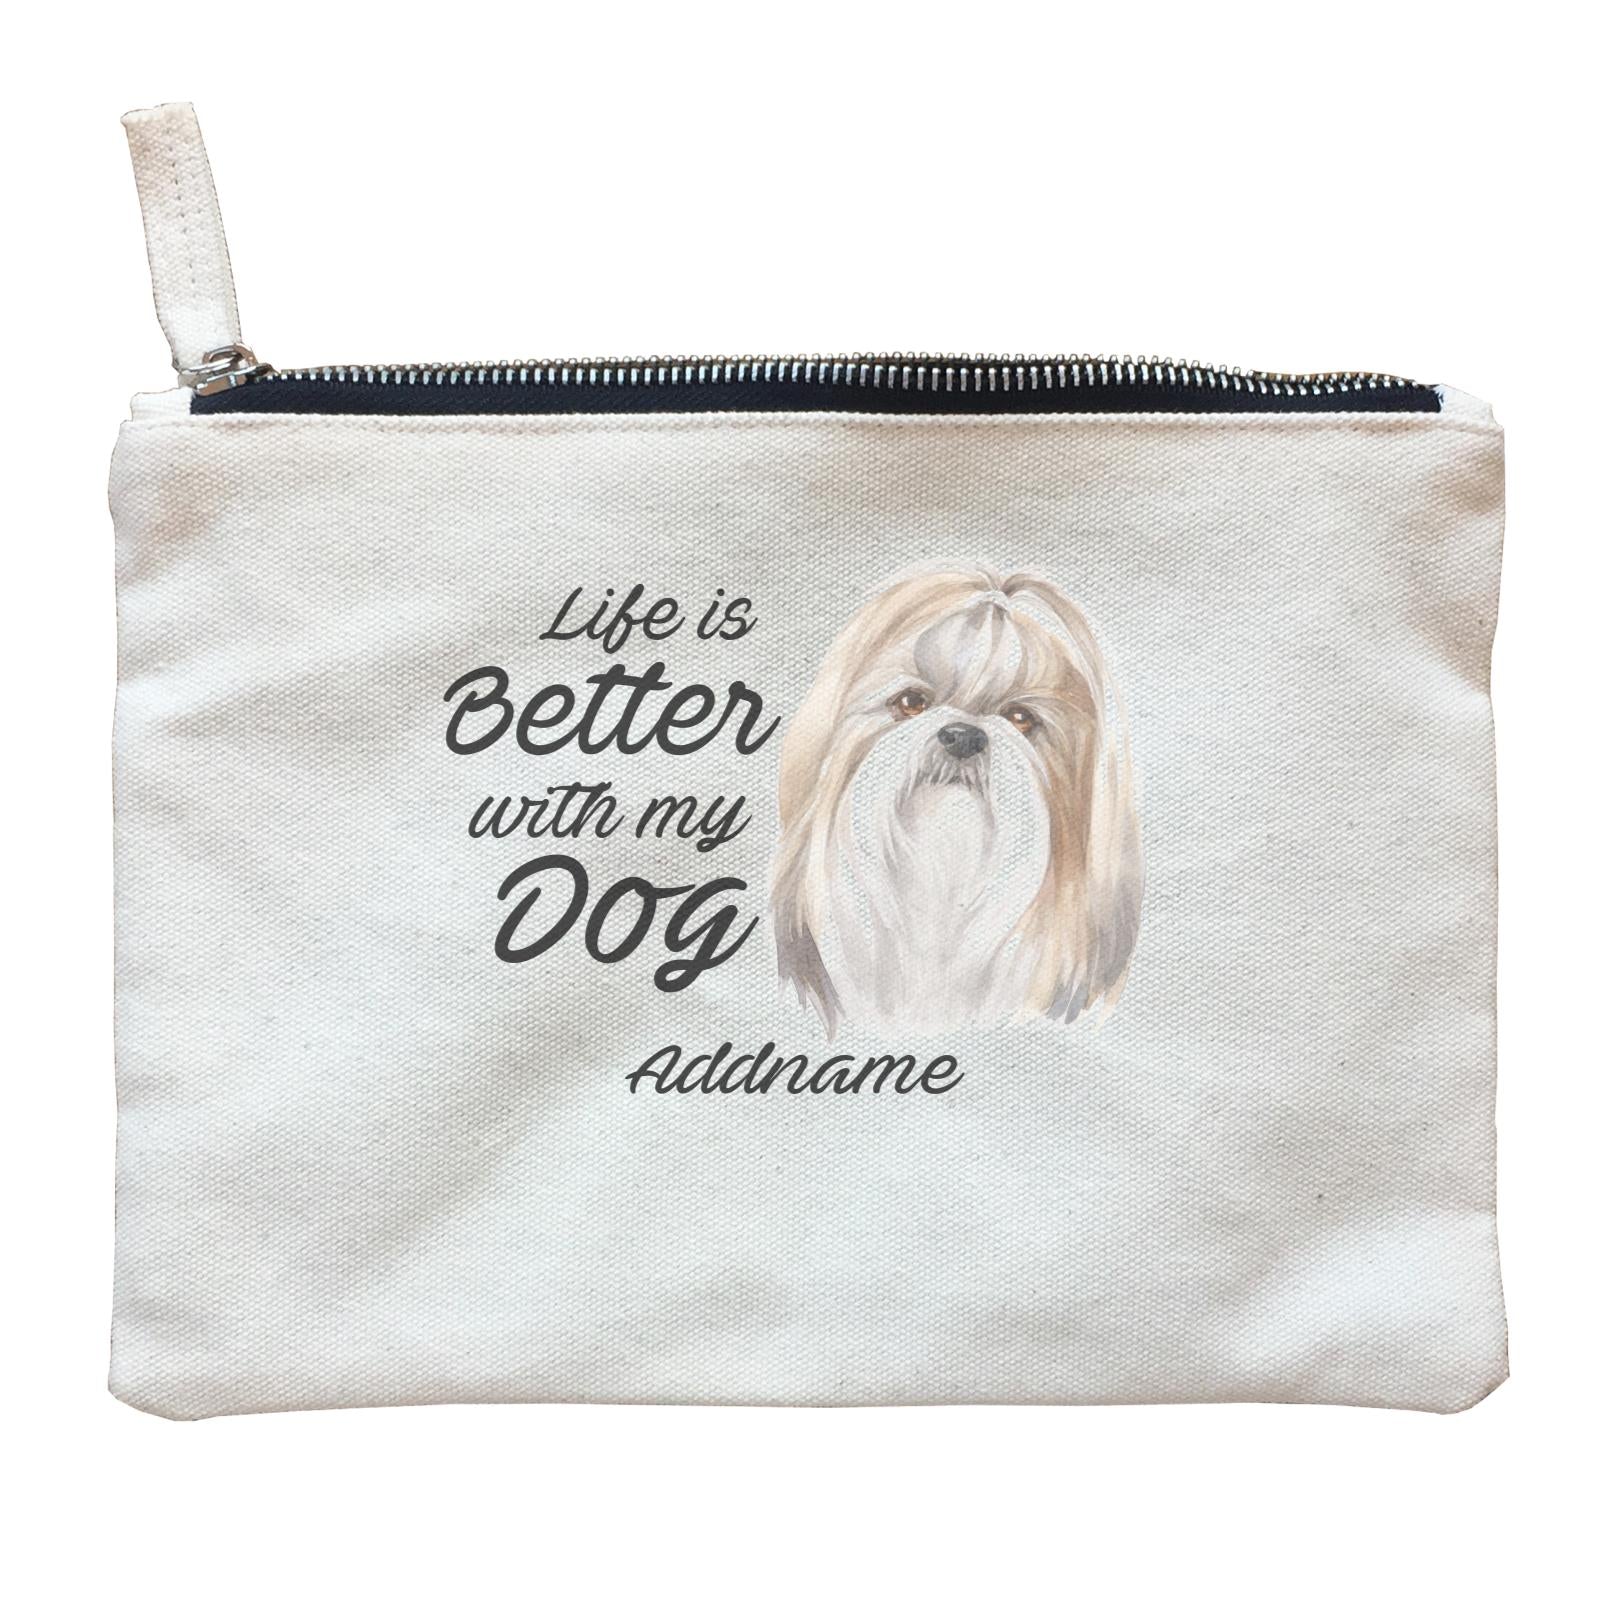 Watercolor Life is Better With My Dog Shih Tzu Addname Zipper Pouch